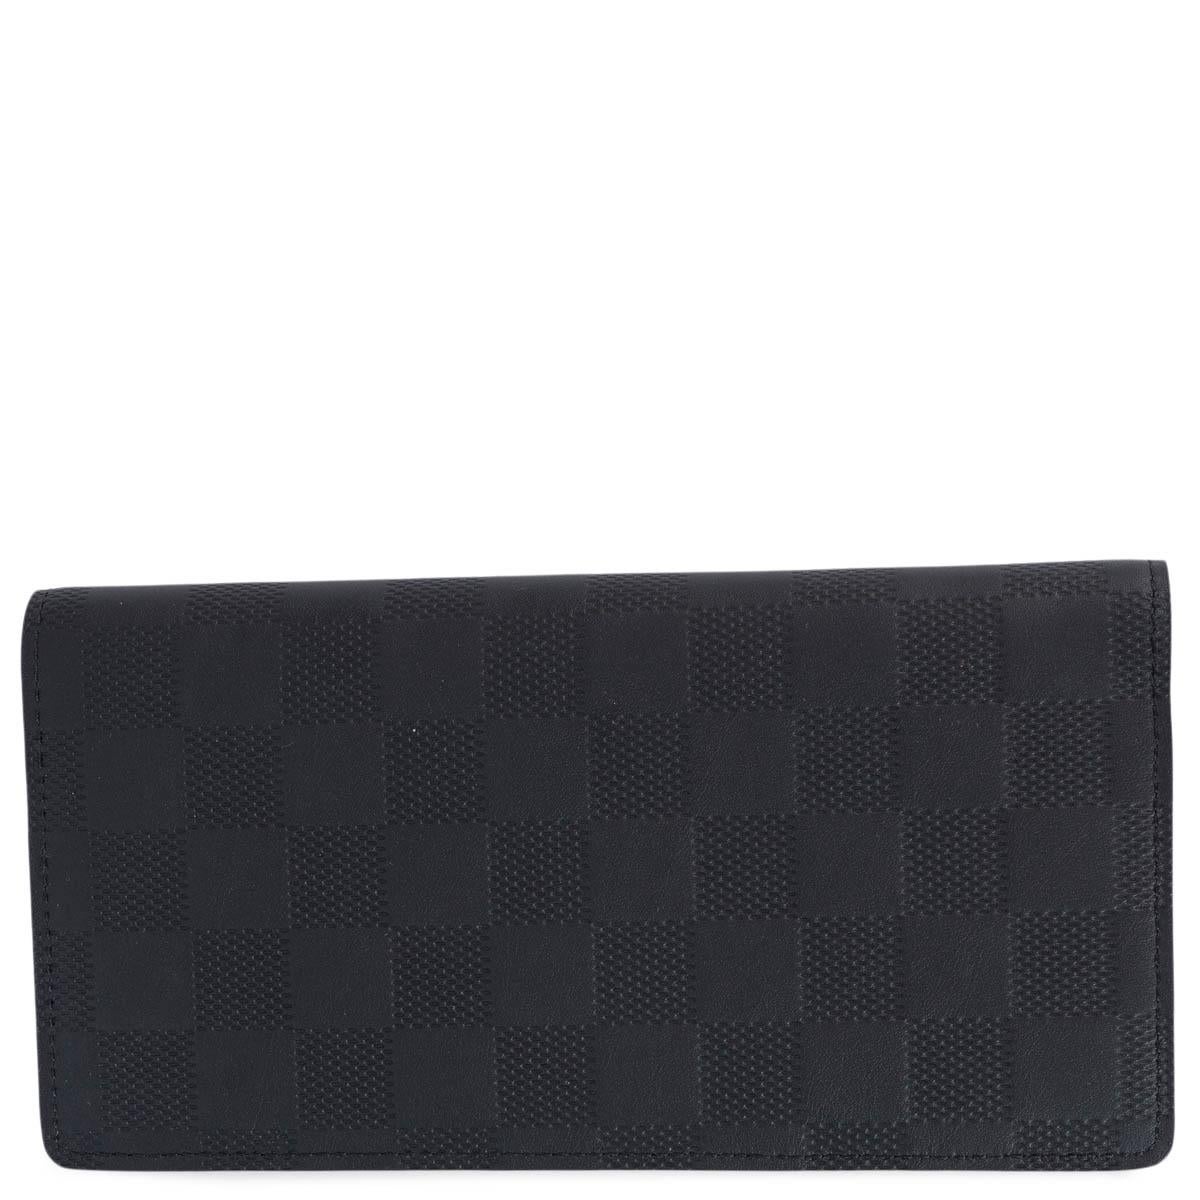 100% authentic Louis Vuitton Brazza wallet in Cosmos (black) Damier Infini leather. The Brazza wallet gives a classic Louis Vuitton pattern an understated twist and features 16 credit card slots, 1 gusseted bill compartment, 1 large zipped